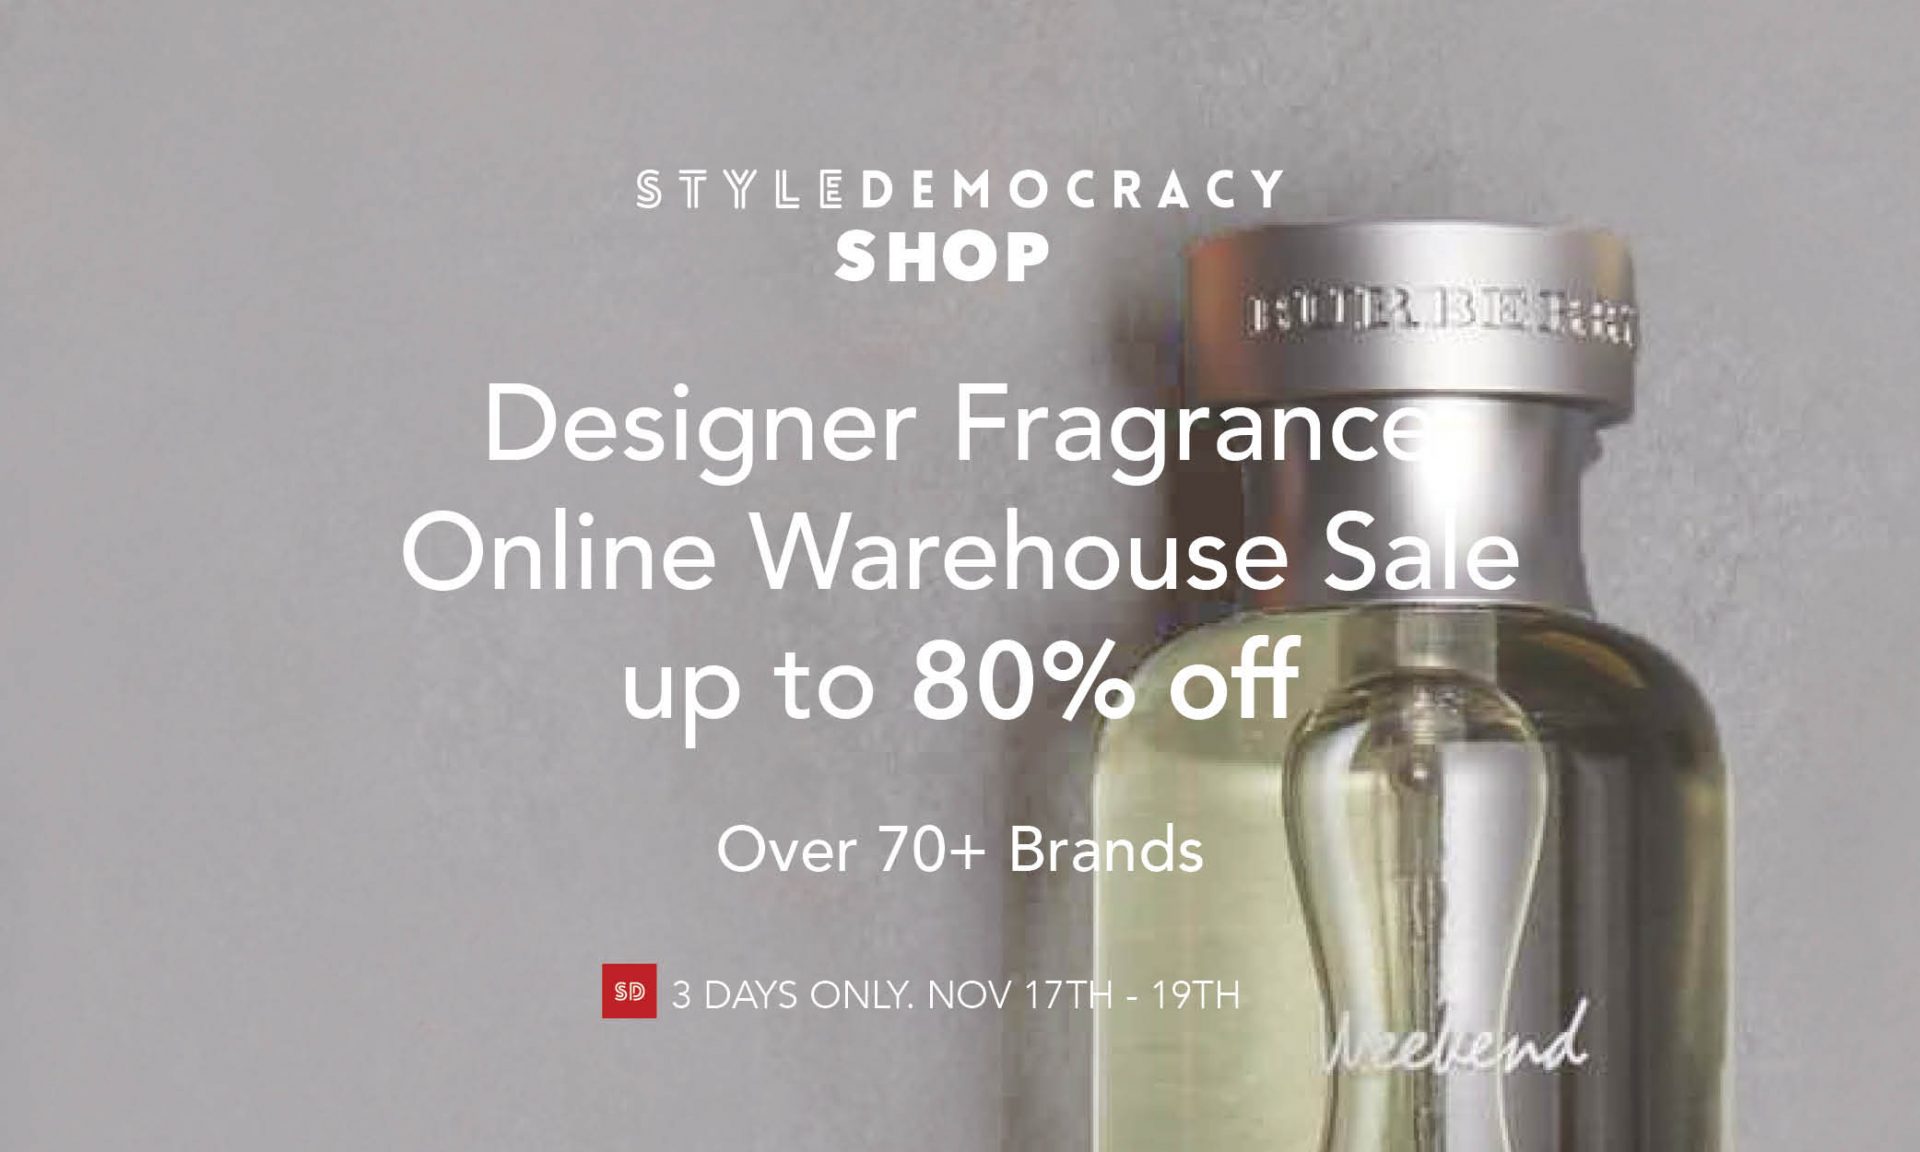 The Designer Fragrance Online Warehouse Sale Powered By StyleDemocracy